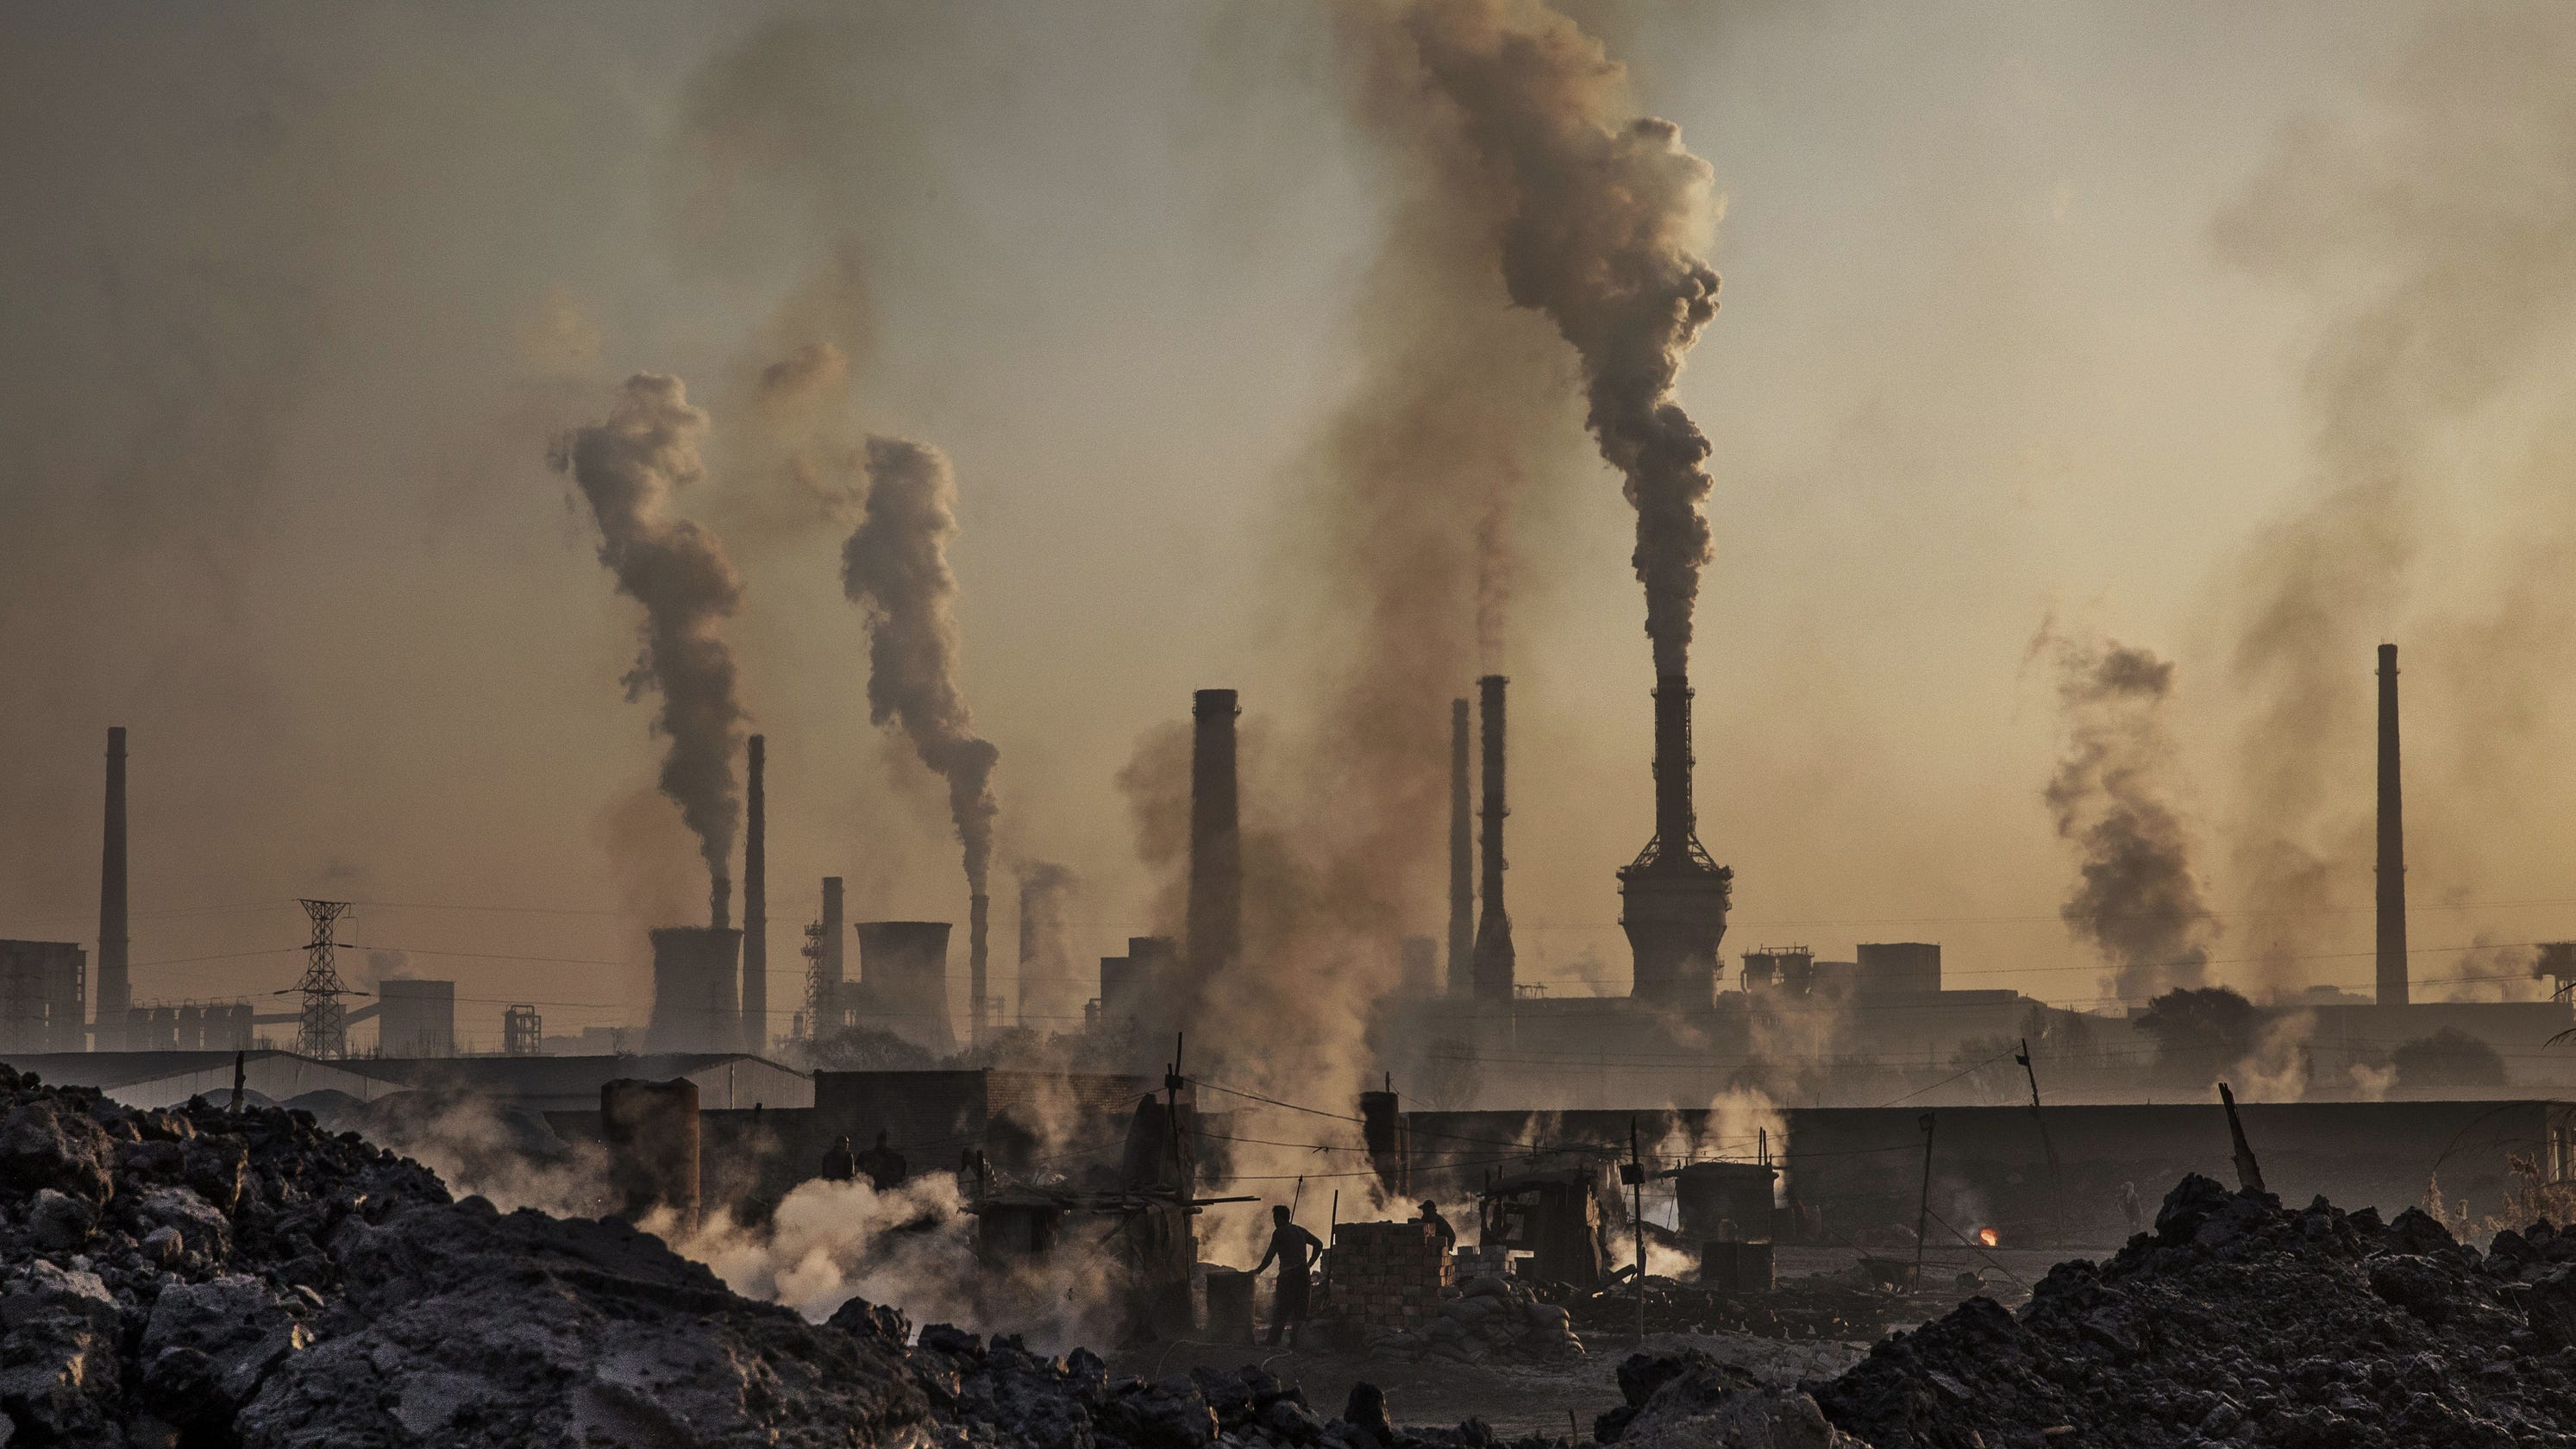 Global carbon dioxide emissions stayed flat in 2019, despite growing economy